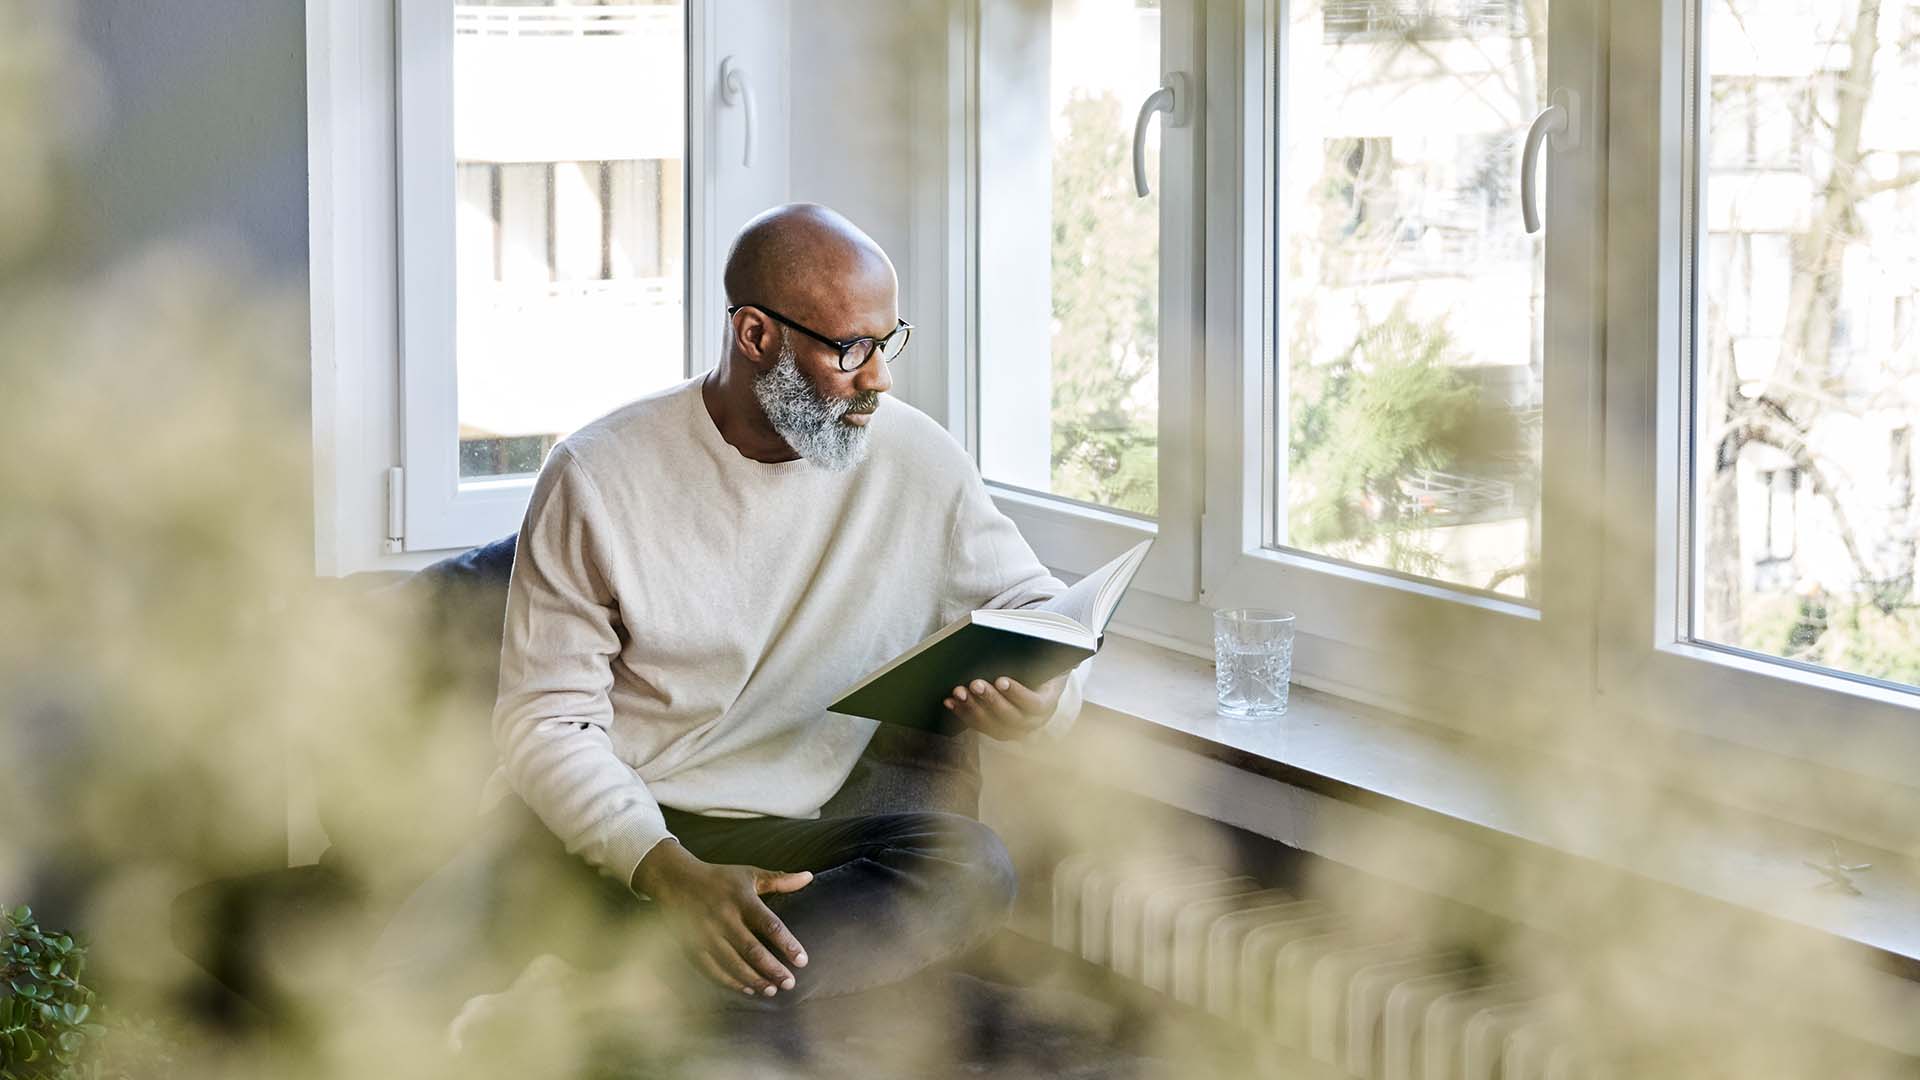 Man sitting at window and reading